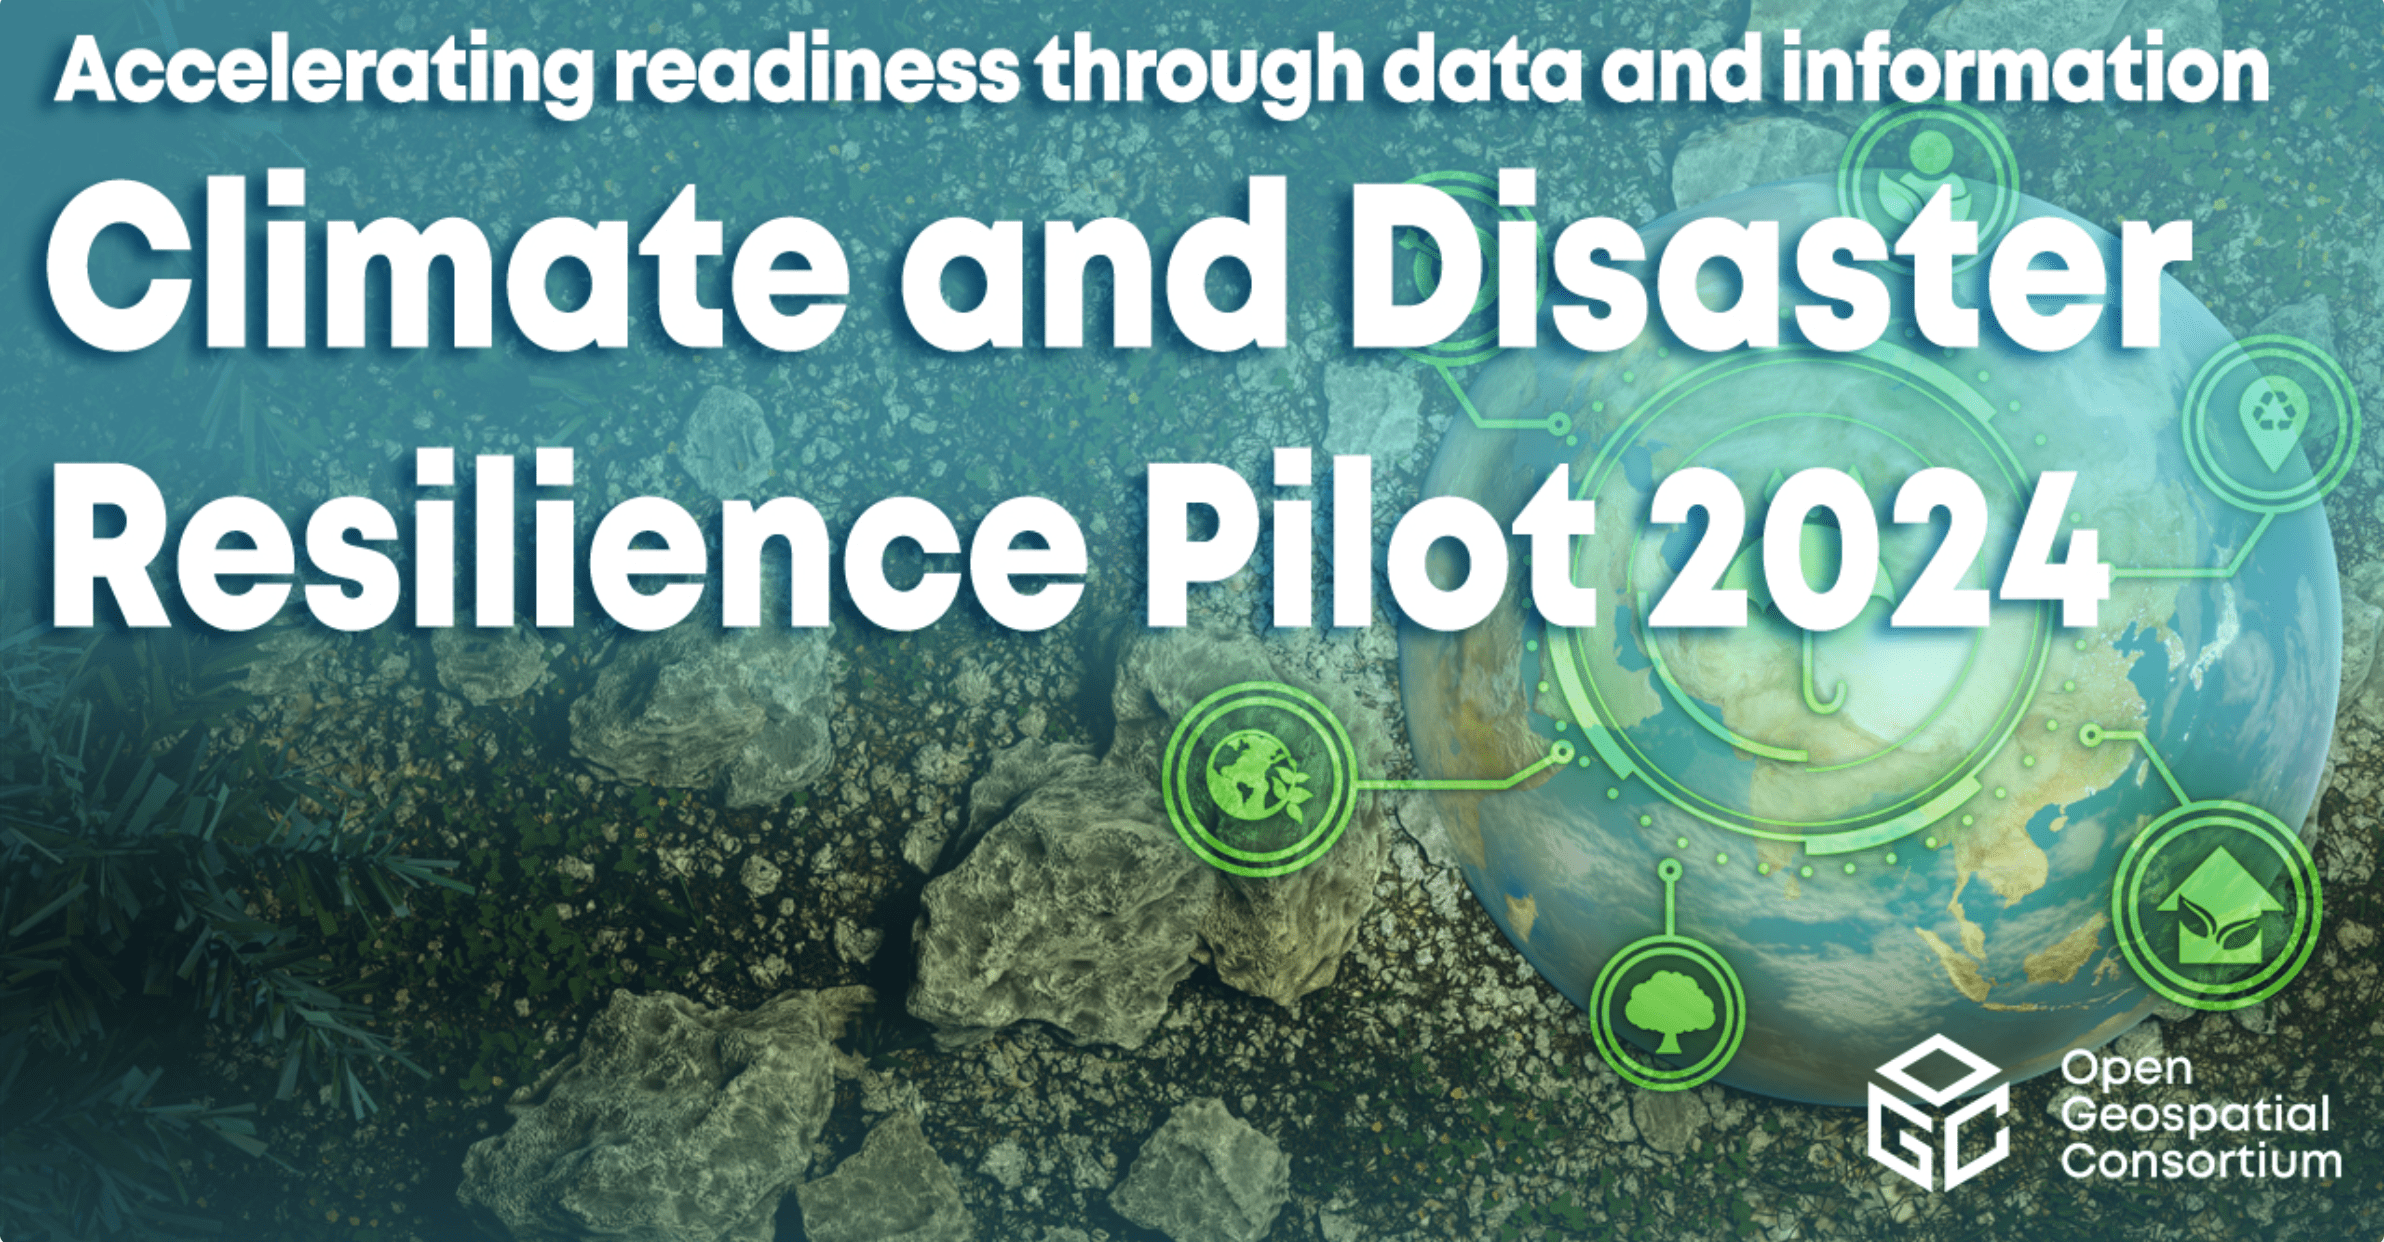 Accelerating readiness through data and information, Climate and Disaster Resilience Pilot 2024, Open •Geospatial Consortium 